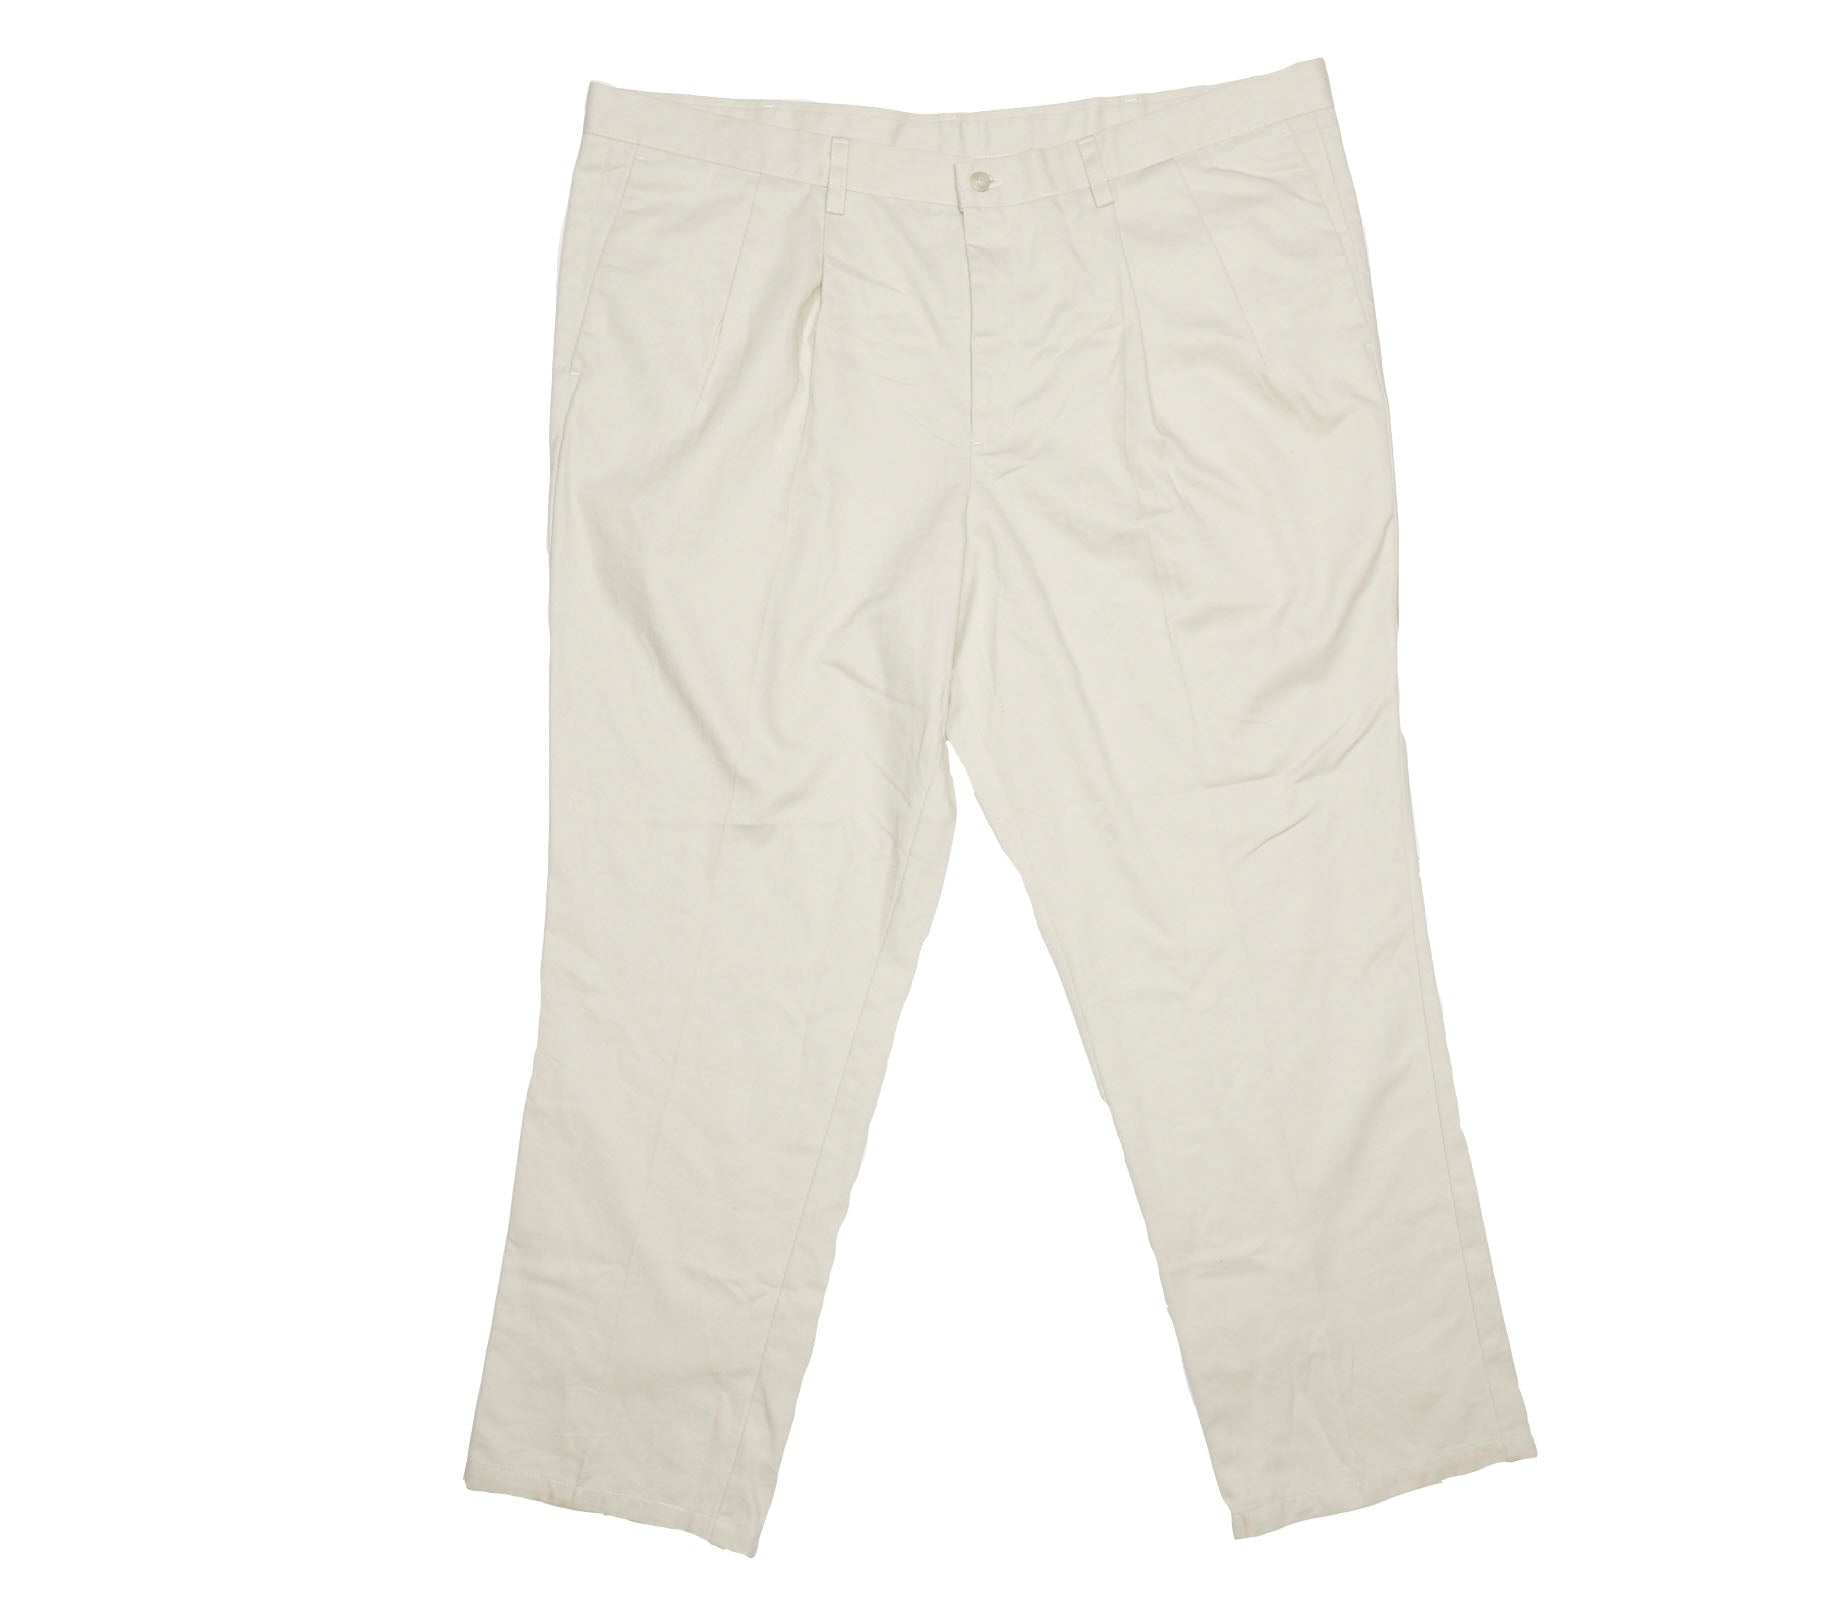 Mens Dockers Chino Trousers - W44" L30"